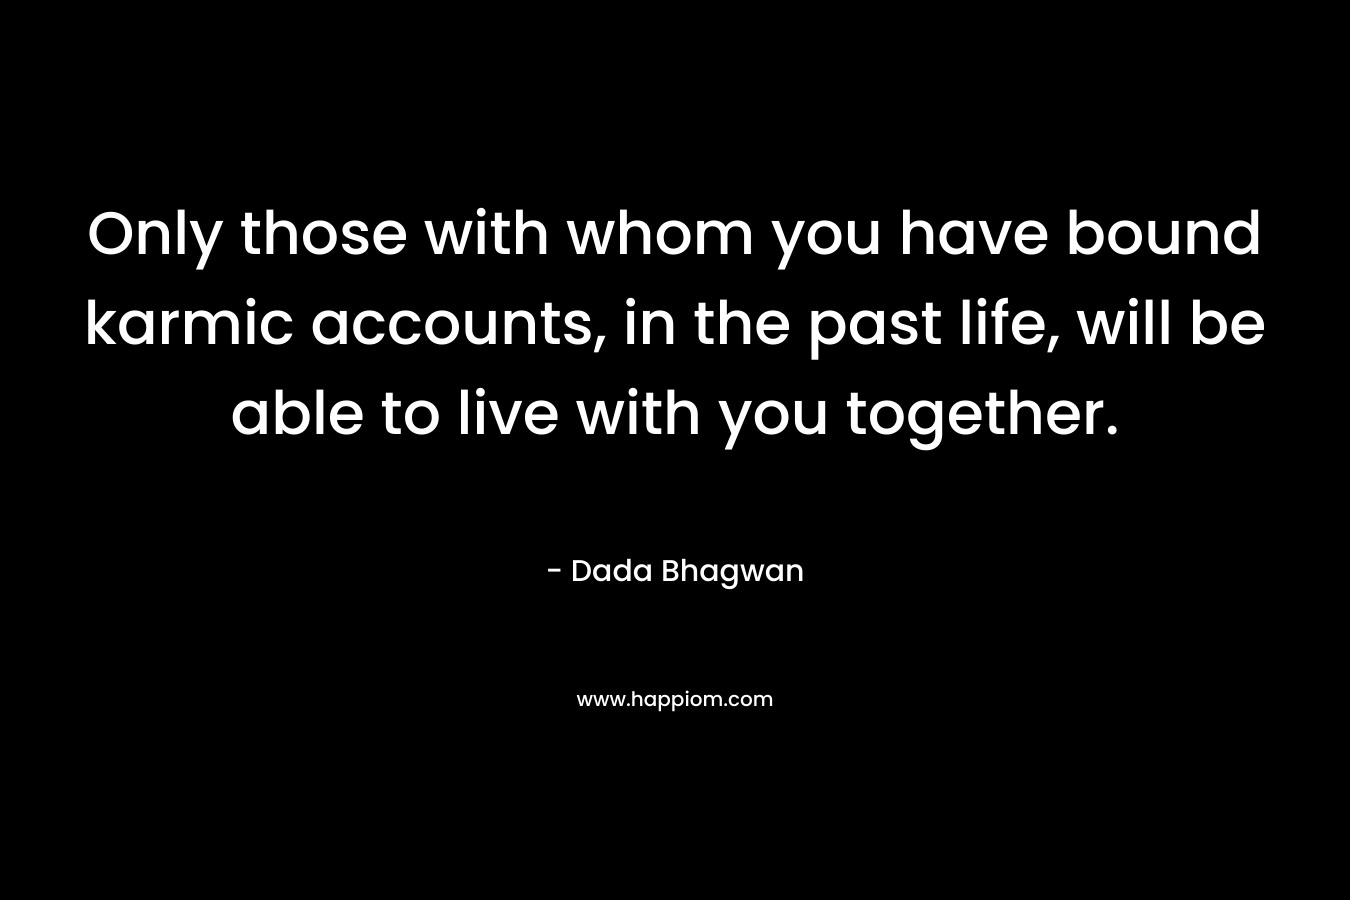 Only those with whom you have bound karmic accounts, in the past life, will be able to live with you together. – Dada Bhagwan